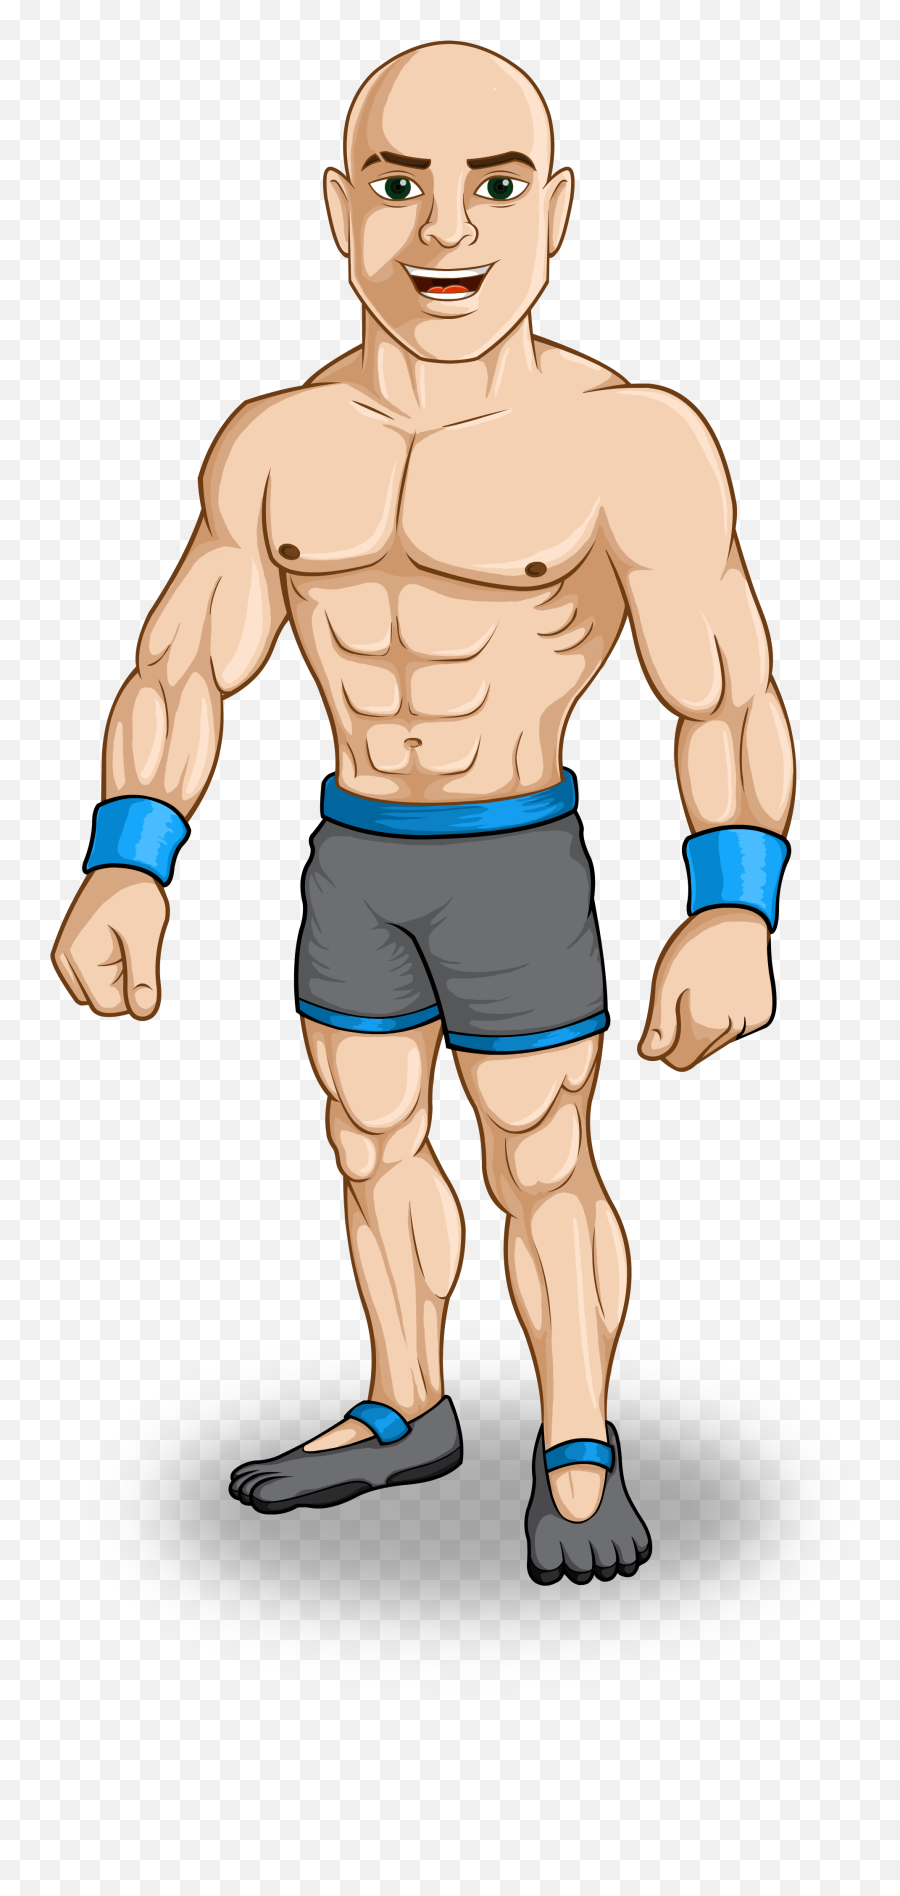 Download Hd Text The Word Callback To 07905 - Fit Man Emoji,Muscle Man Clipart